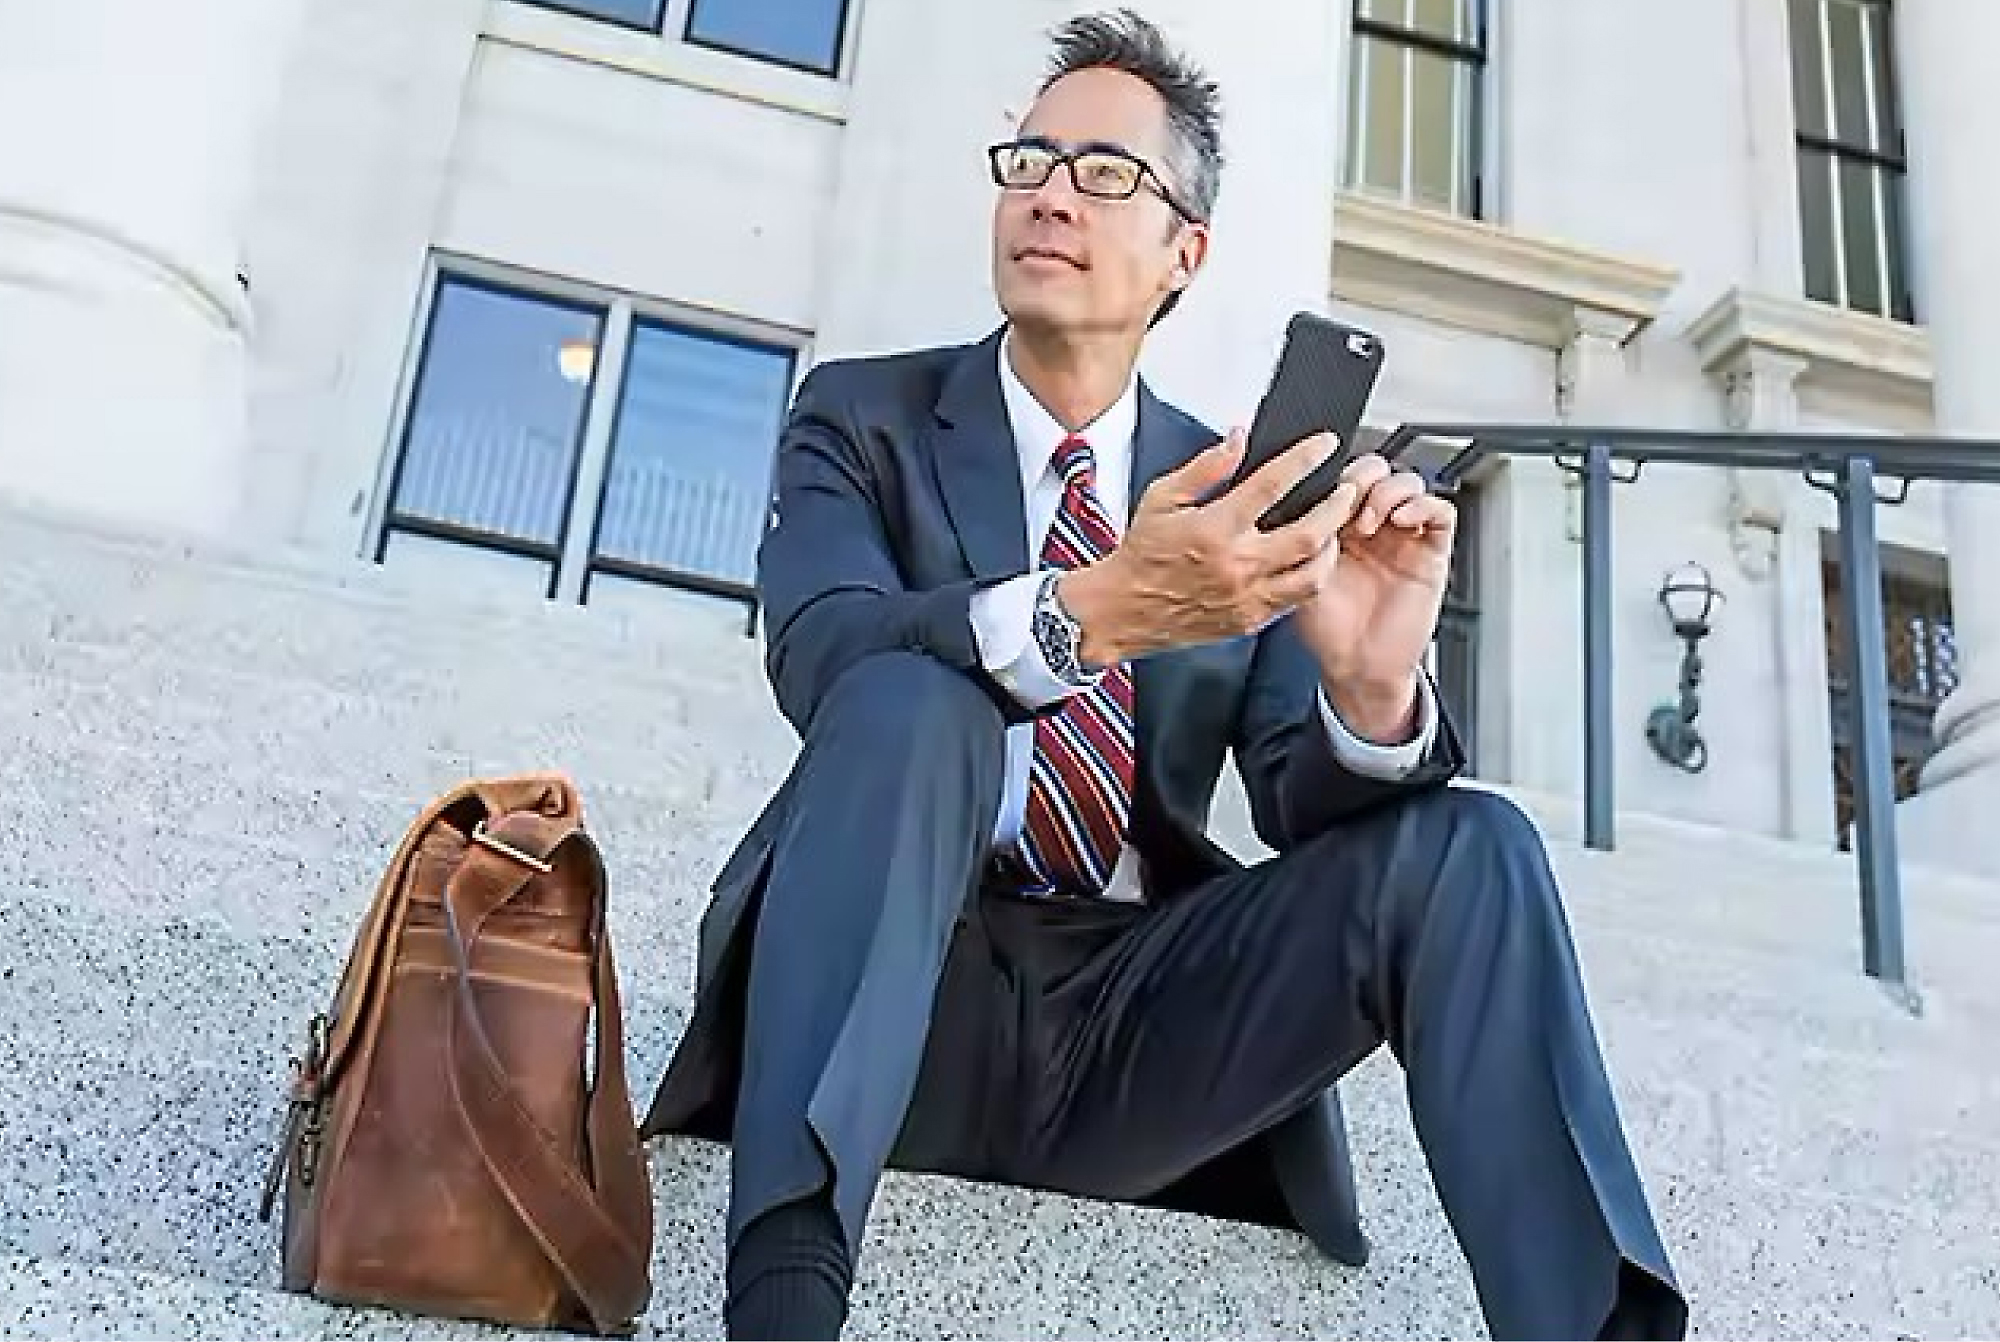 A businessman in a suit and glasses sits on steps outside a building, using a smartphone with a leather bag beside him.